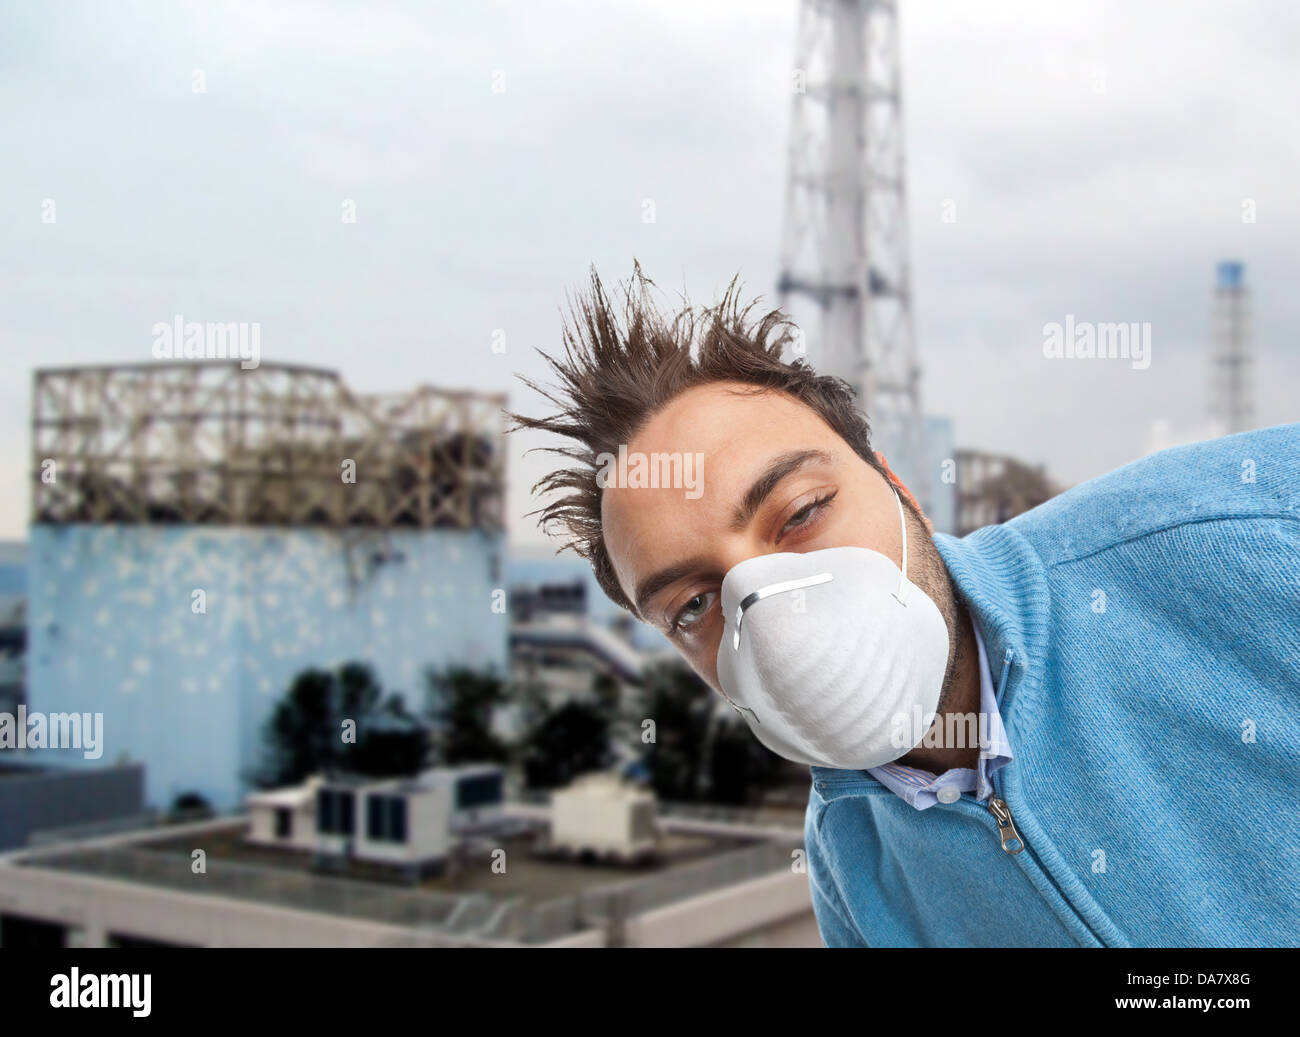 Young boy with mask respiratory protection near nuclear reactors Stock Photo